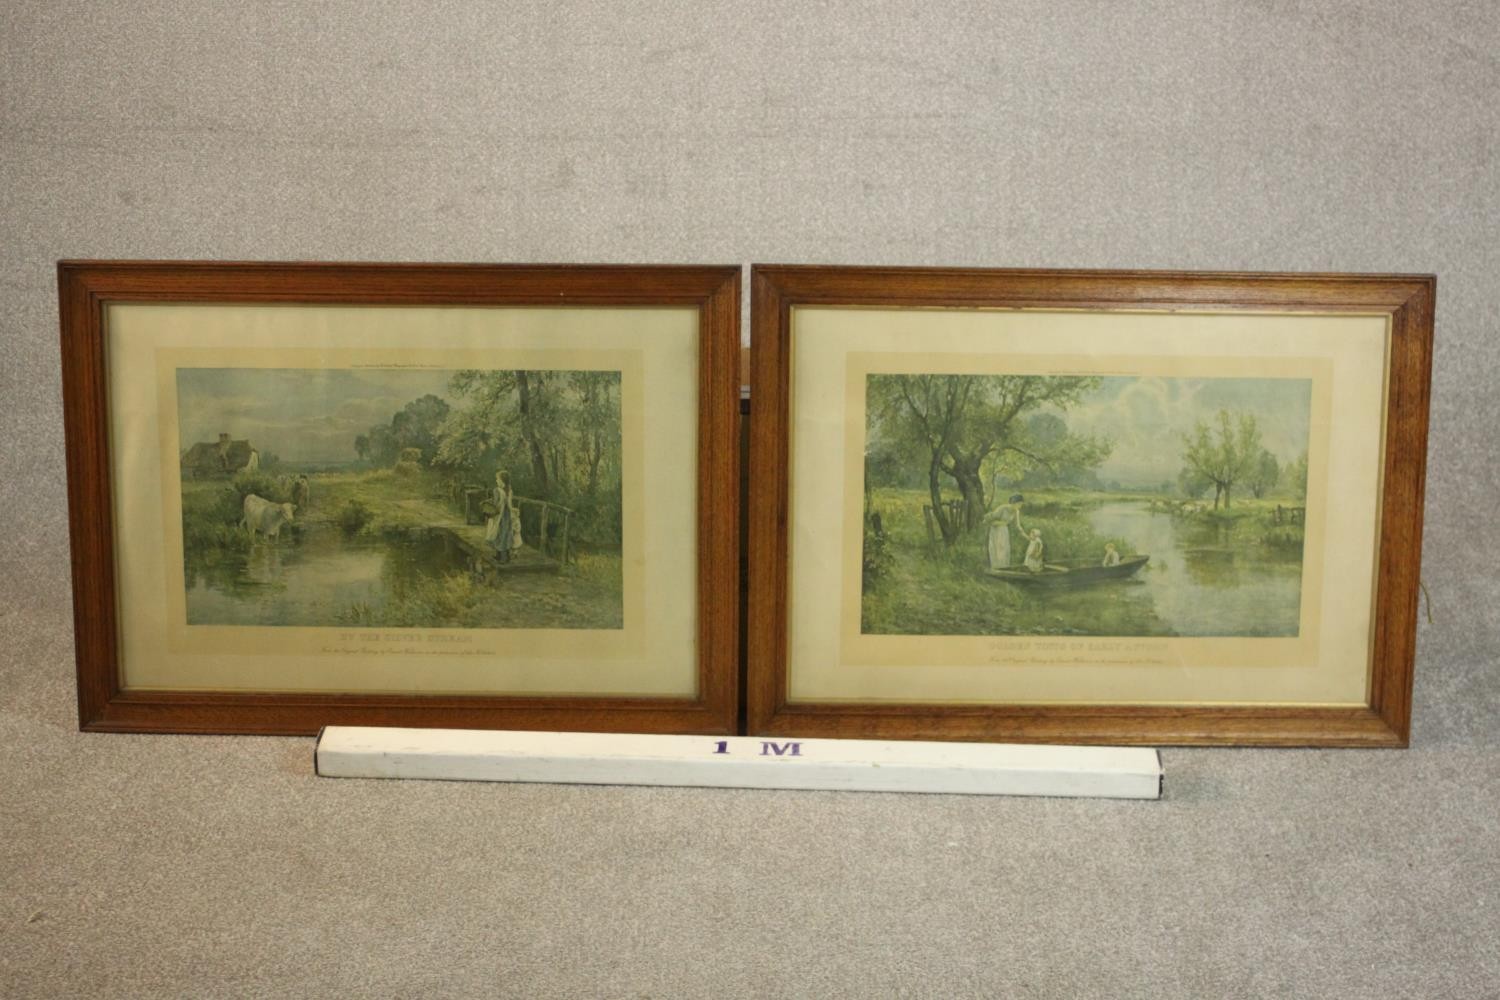 Two framed and glazed Victorian prints of river scenes, one with a girl on a bridge and people - Image 2 of 6